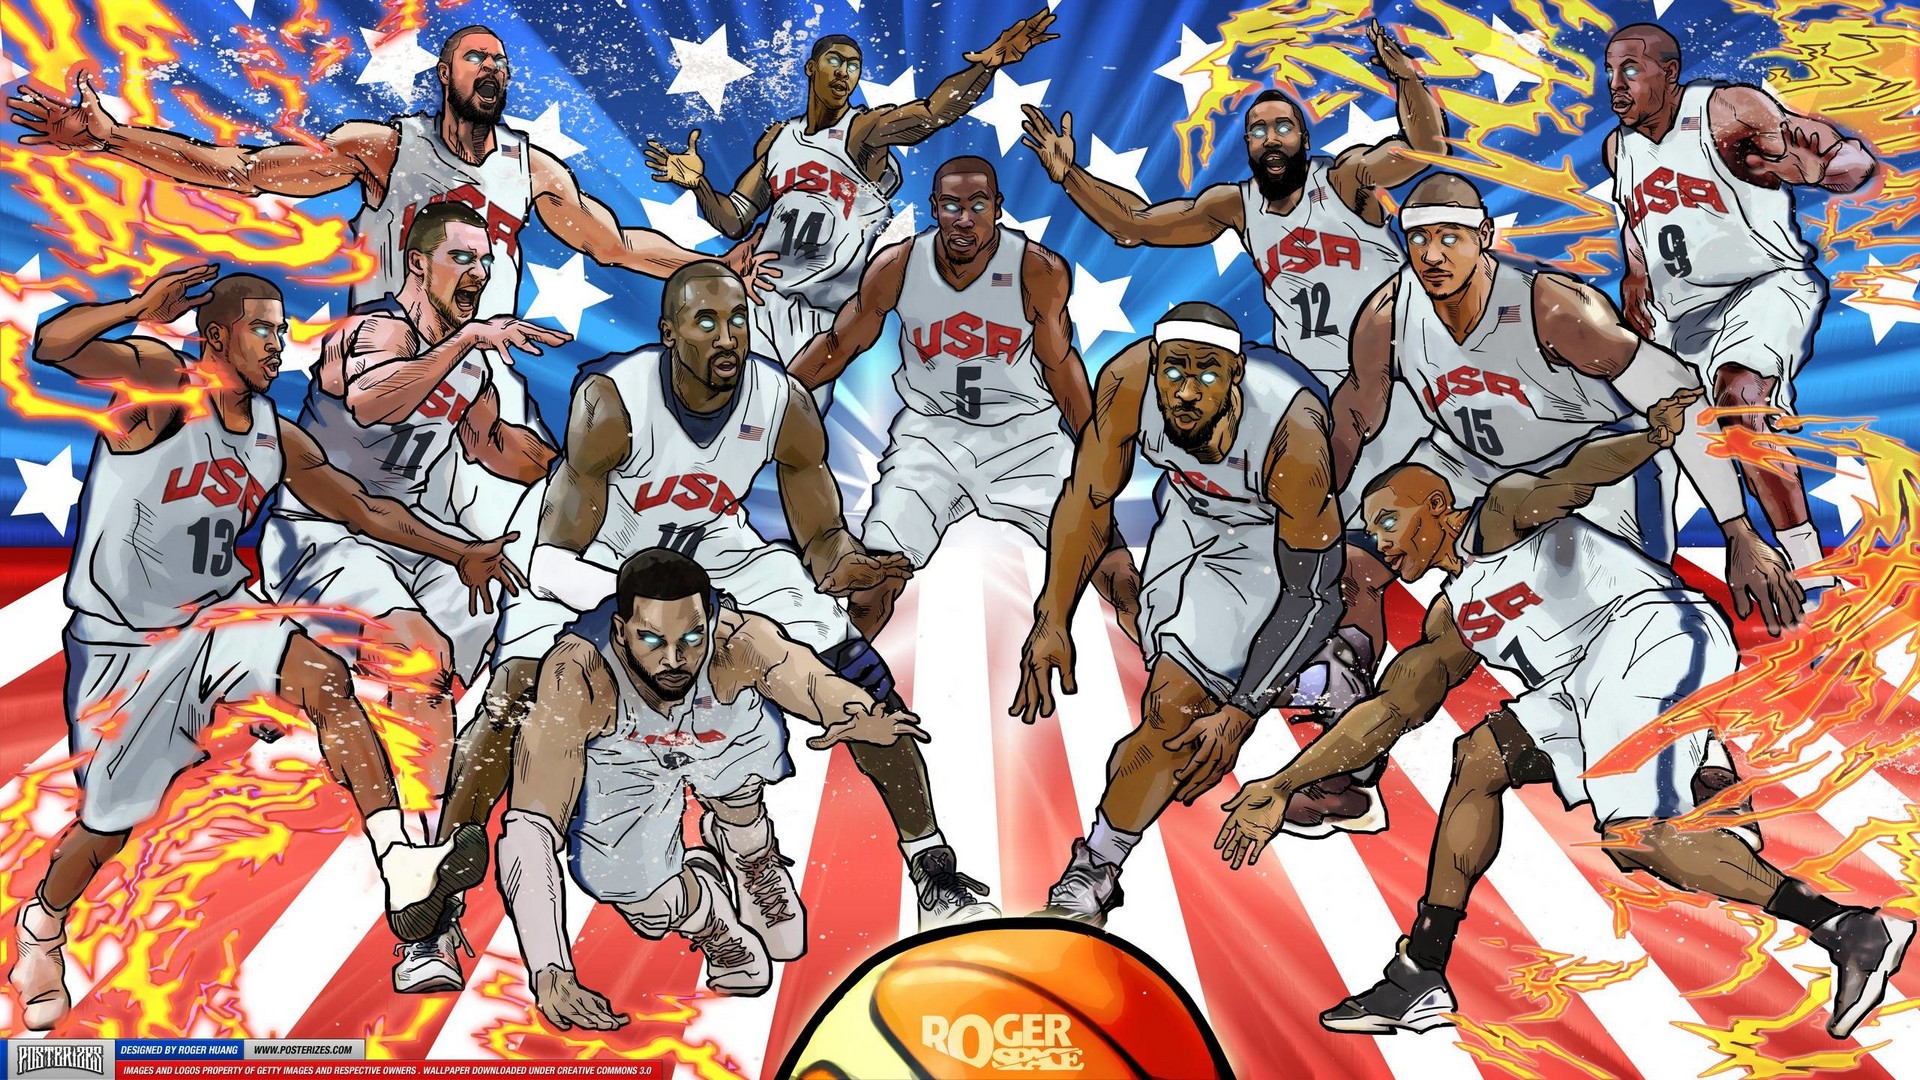 NBA Desktop Wallpapers with image dimensions 1920X1080 pixel. You can make this wallpaper for your Desktop Computer Backgrounds, Windows or Mac Screensavers, iPhone Lock screen, Tablet or Android and another Mobile Phone device